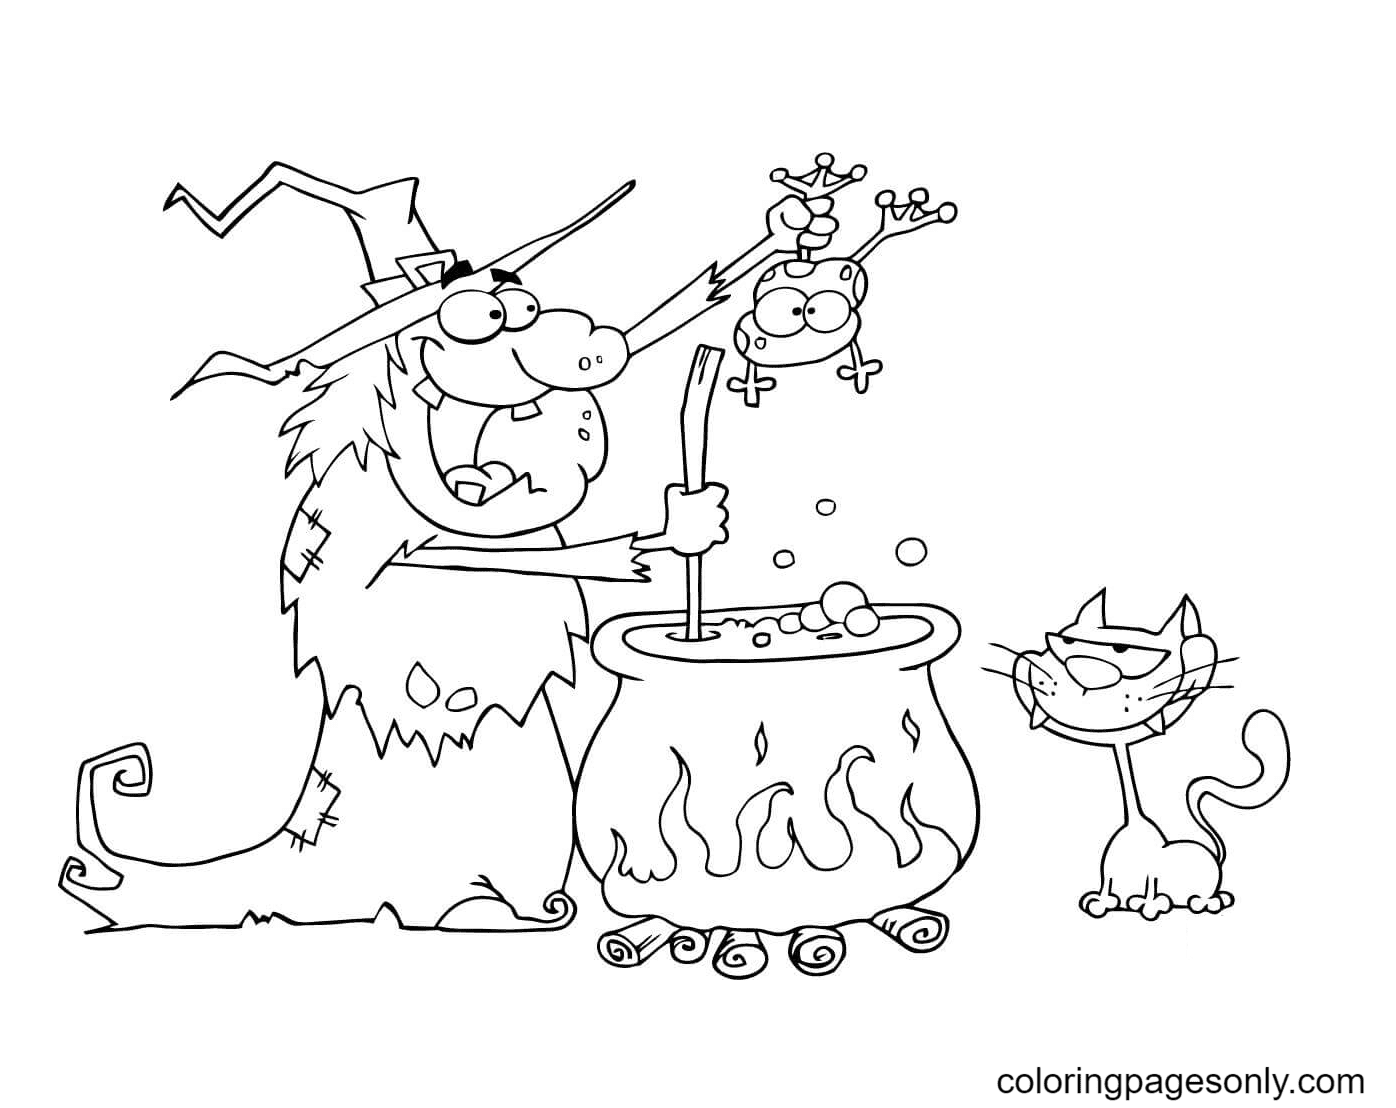 Witch holding a Frog Preparing to Cook Medicine Coloring Pages